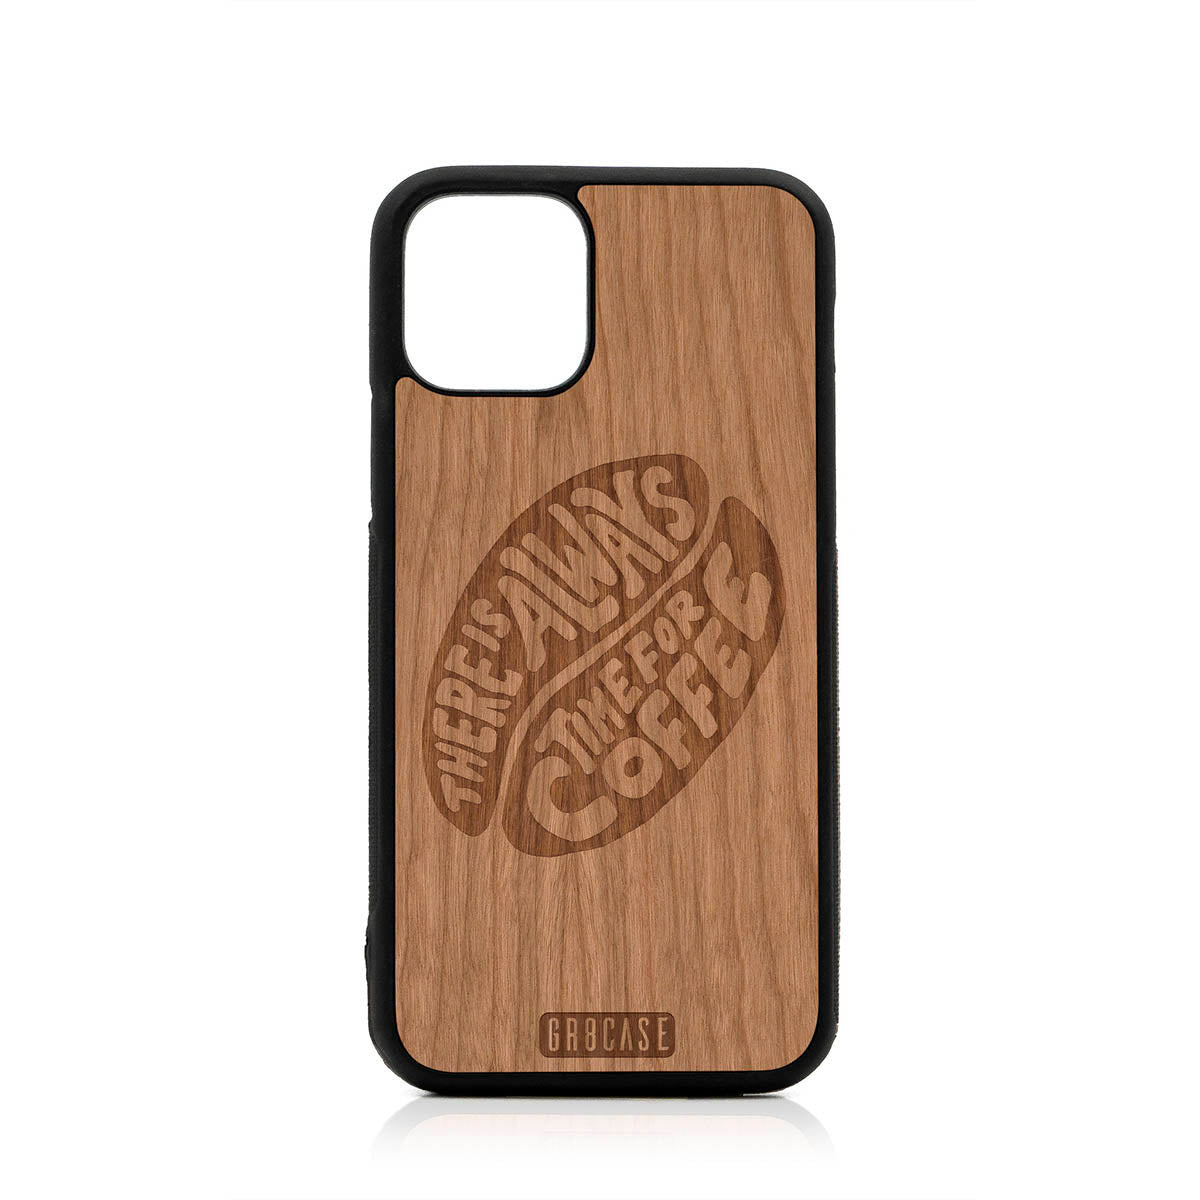 There Is Always Time For Coffee Design Wood Case For iPhone 11 Pro